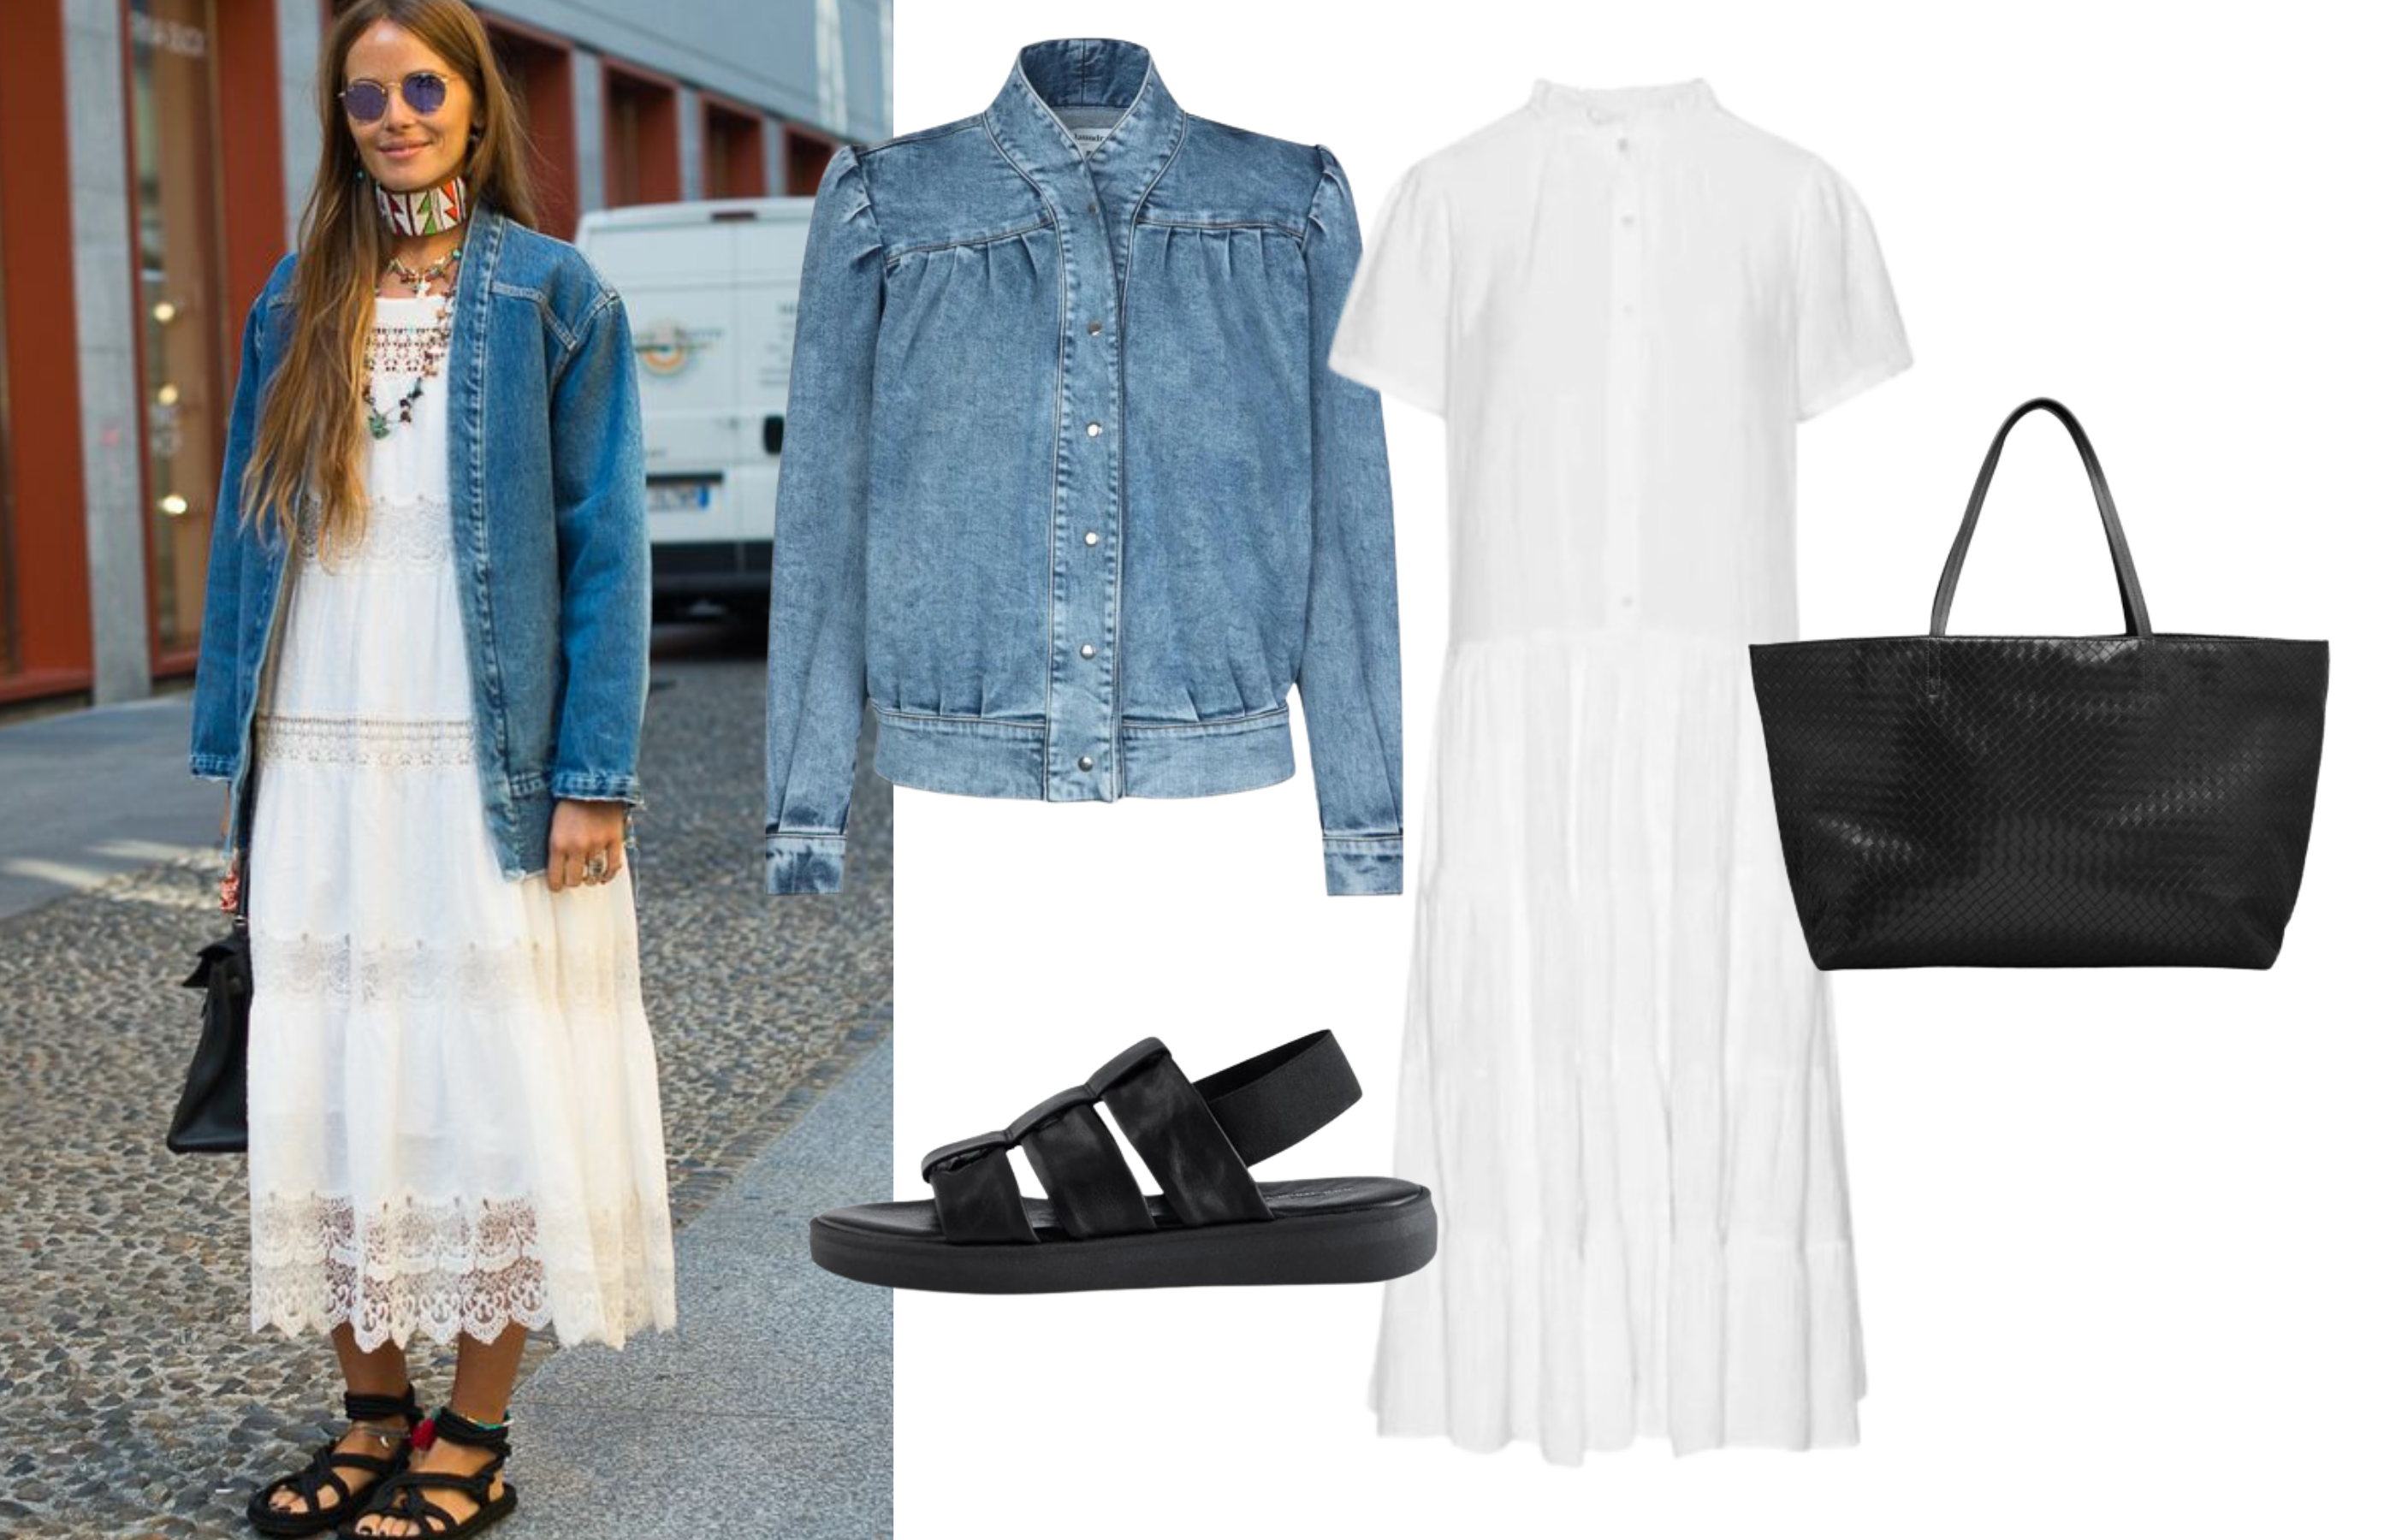 Light wash denim jacket paired with a floaty white dress, sandals and a tote bag